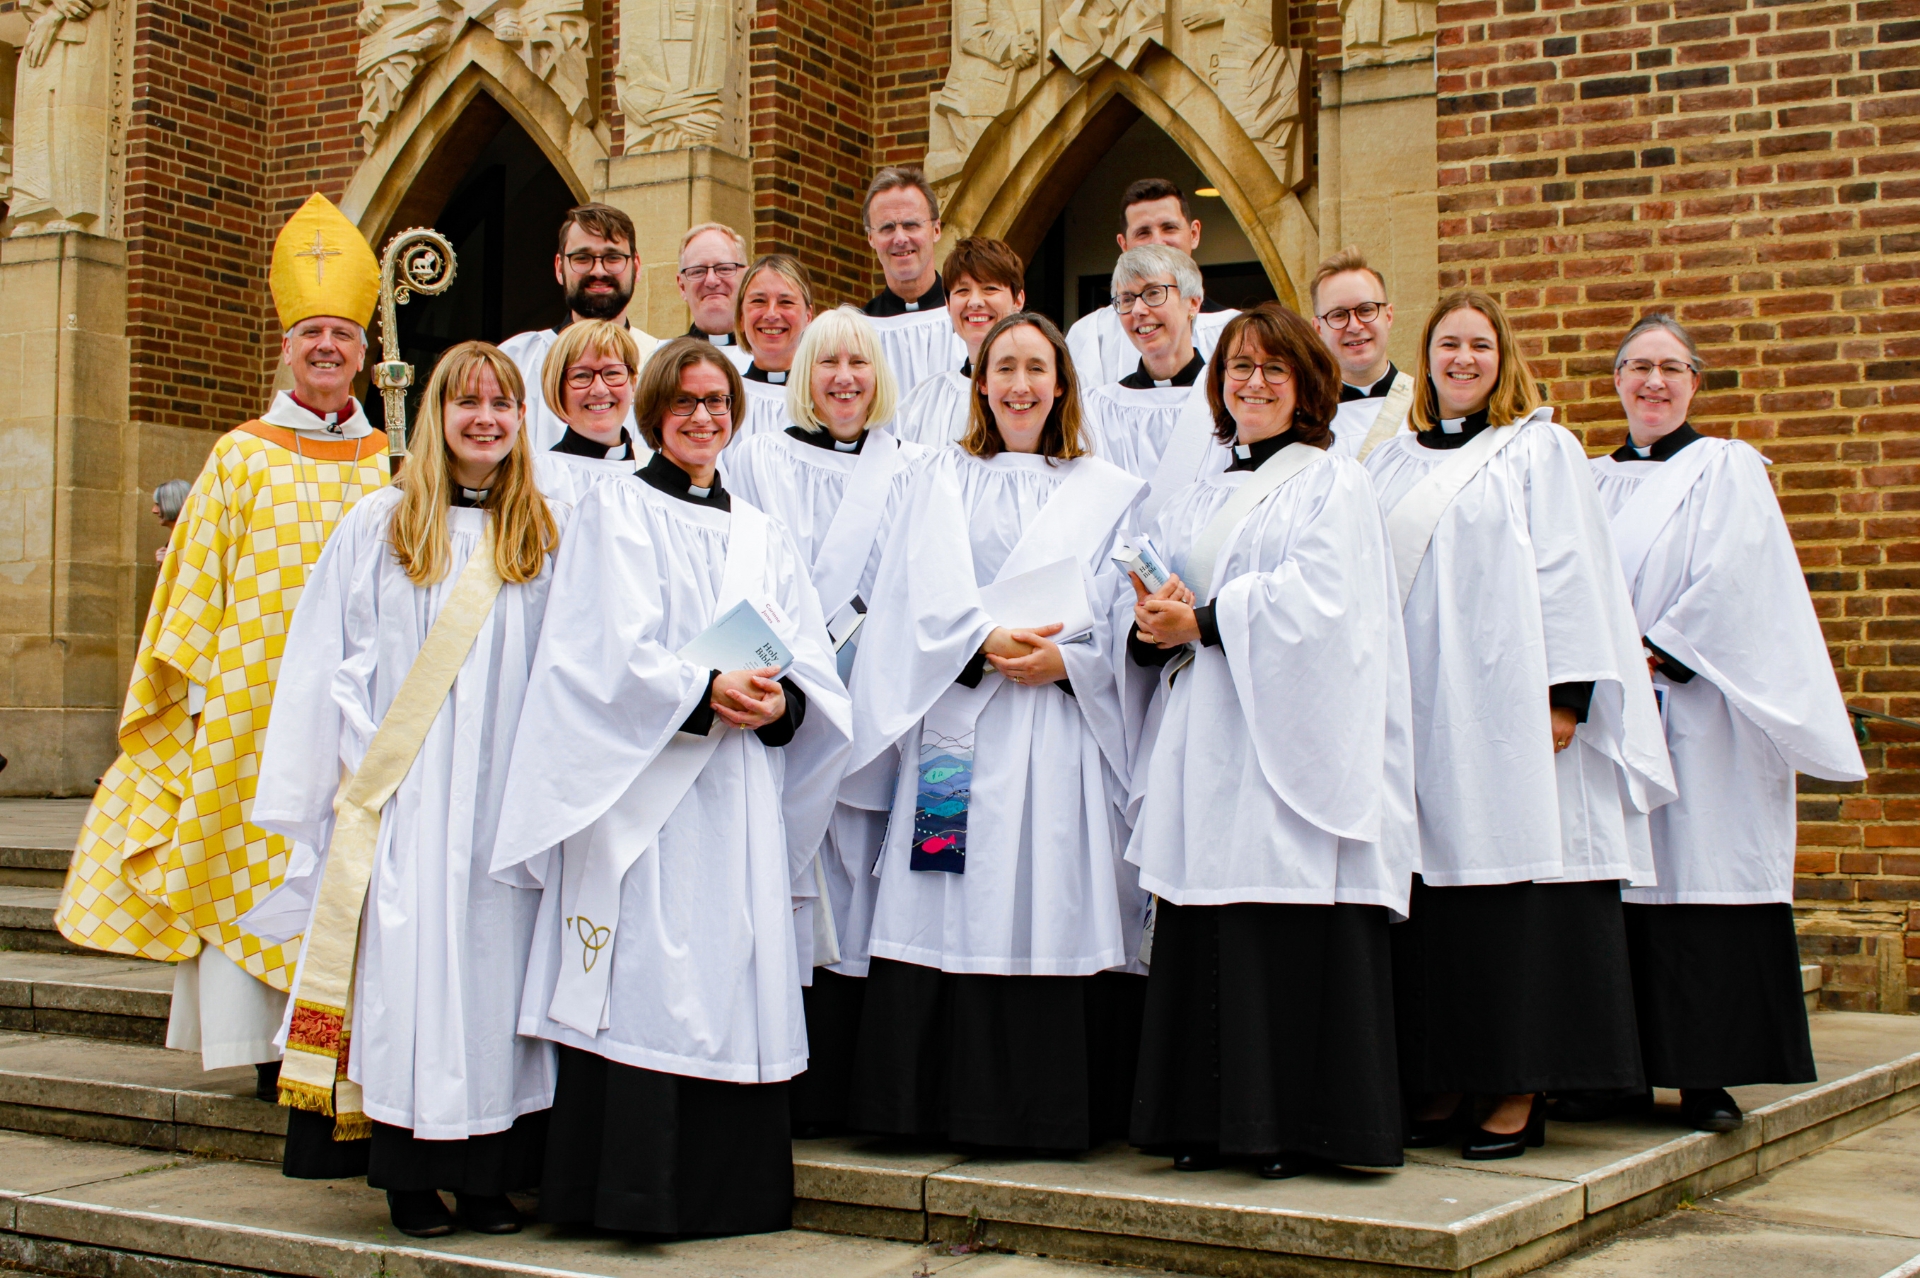 16 new deacons on the steps of Guildford Cathedral celebrating their ordination with the Bishoop of Guildford